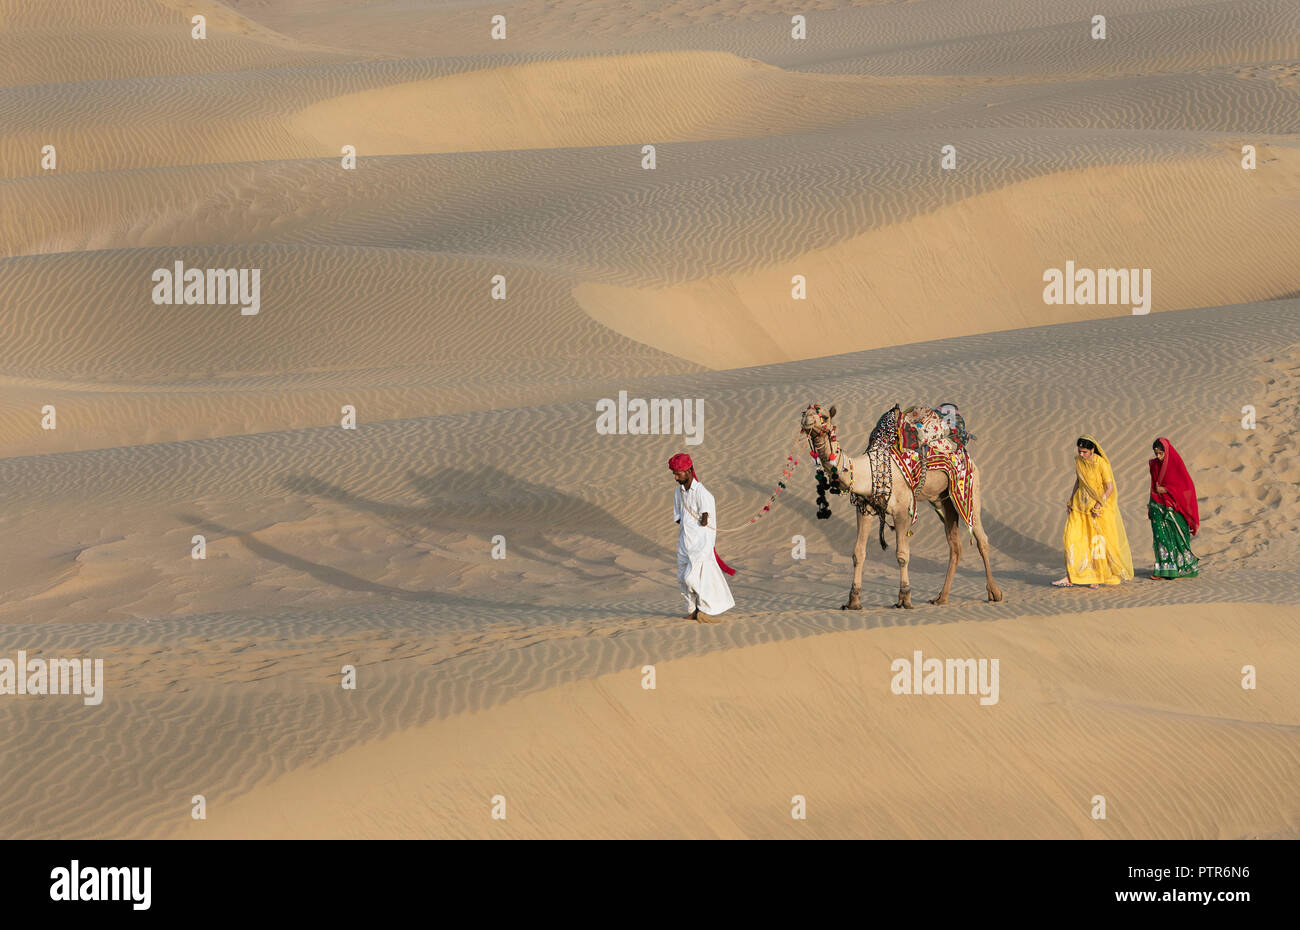 The image of Rajasthani trditional man and woman in sand dunes,  Jaisalmer, Rajasthan, India Stock Photo